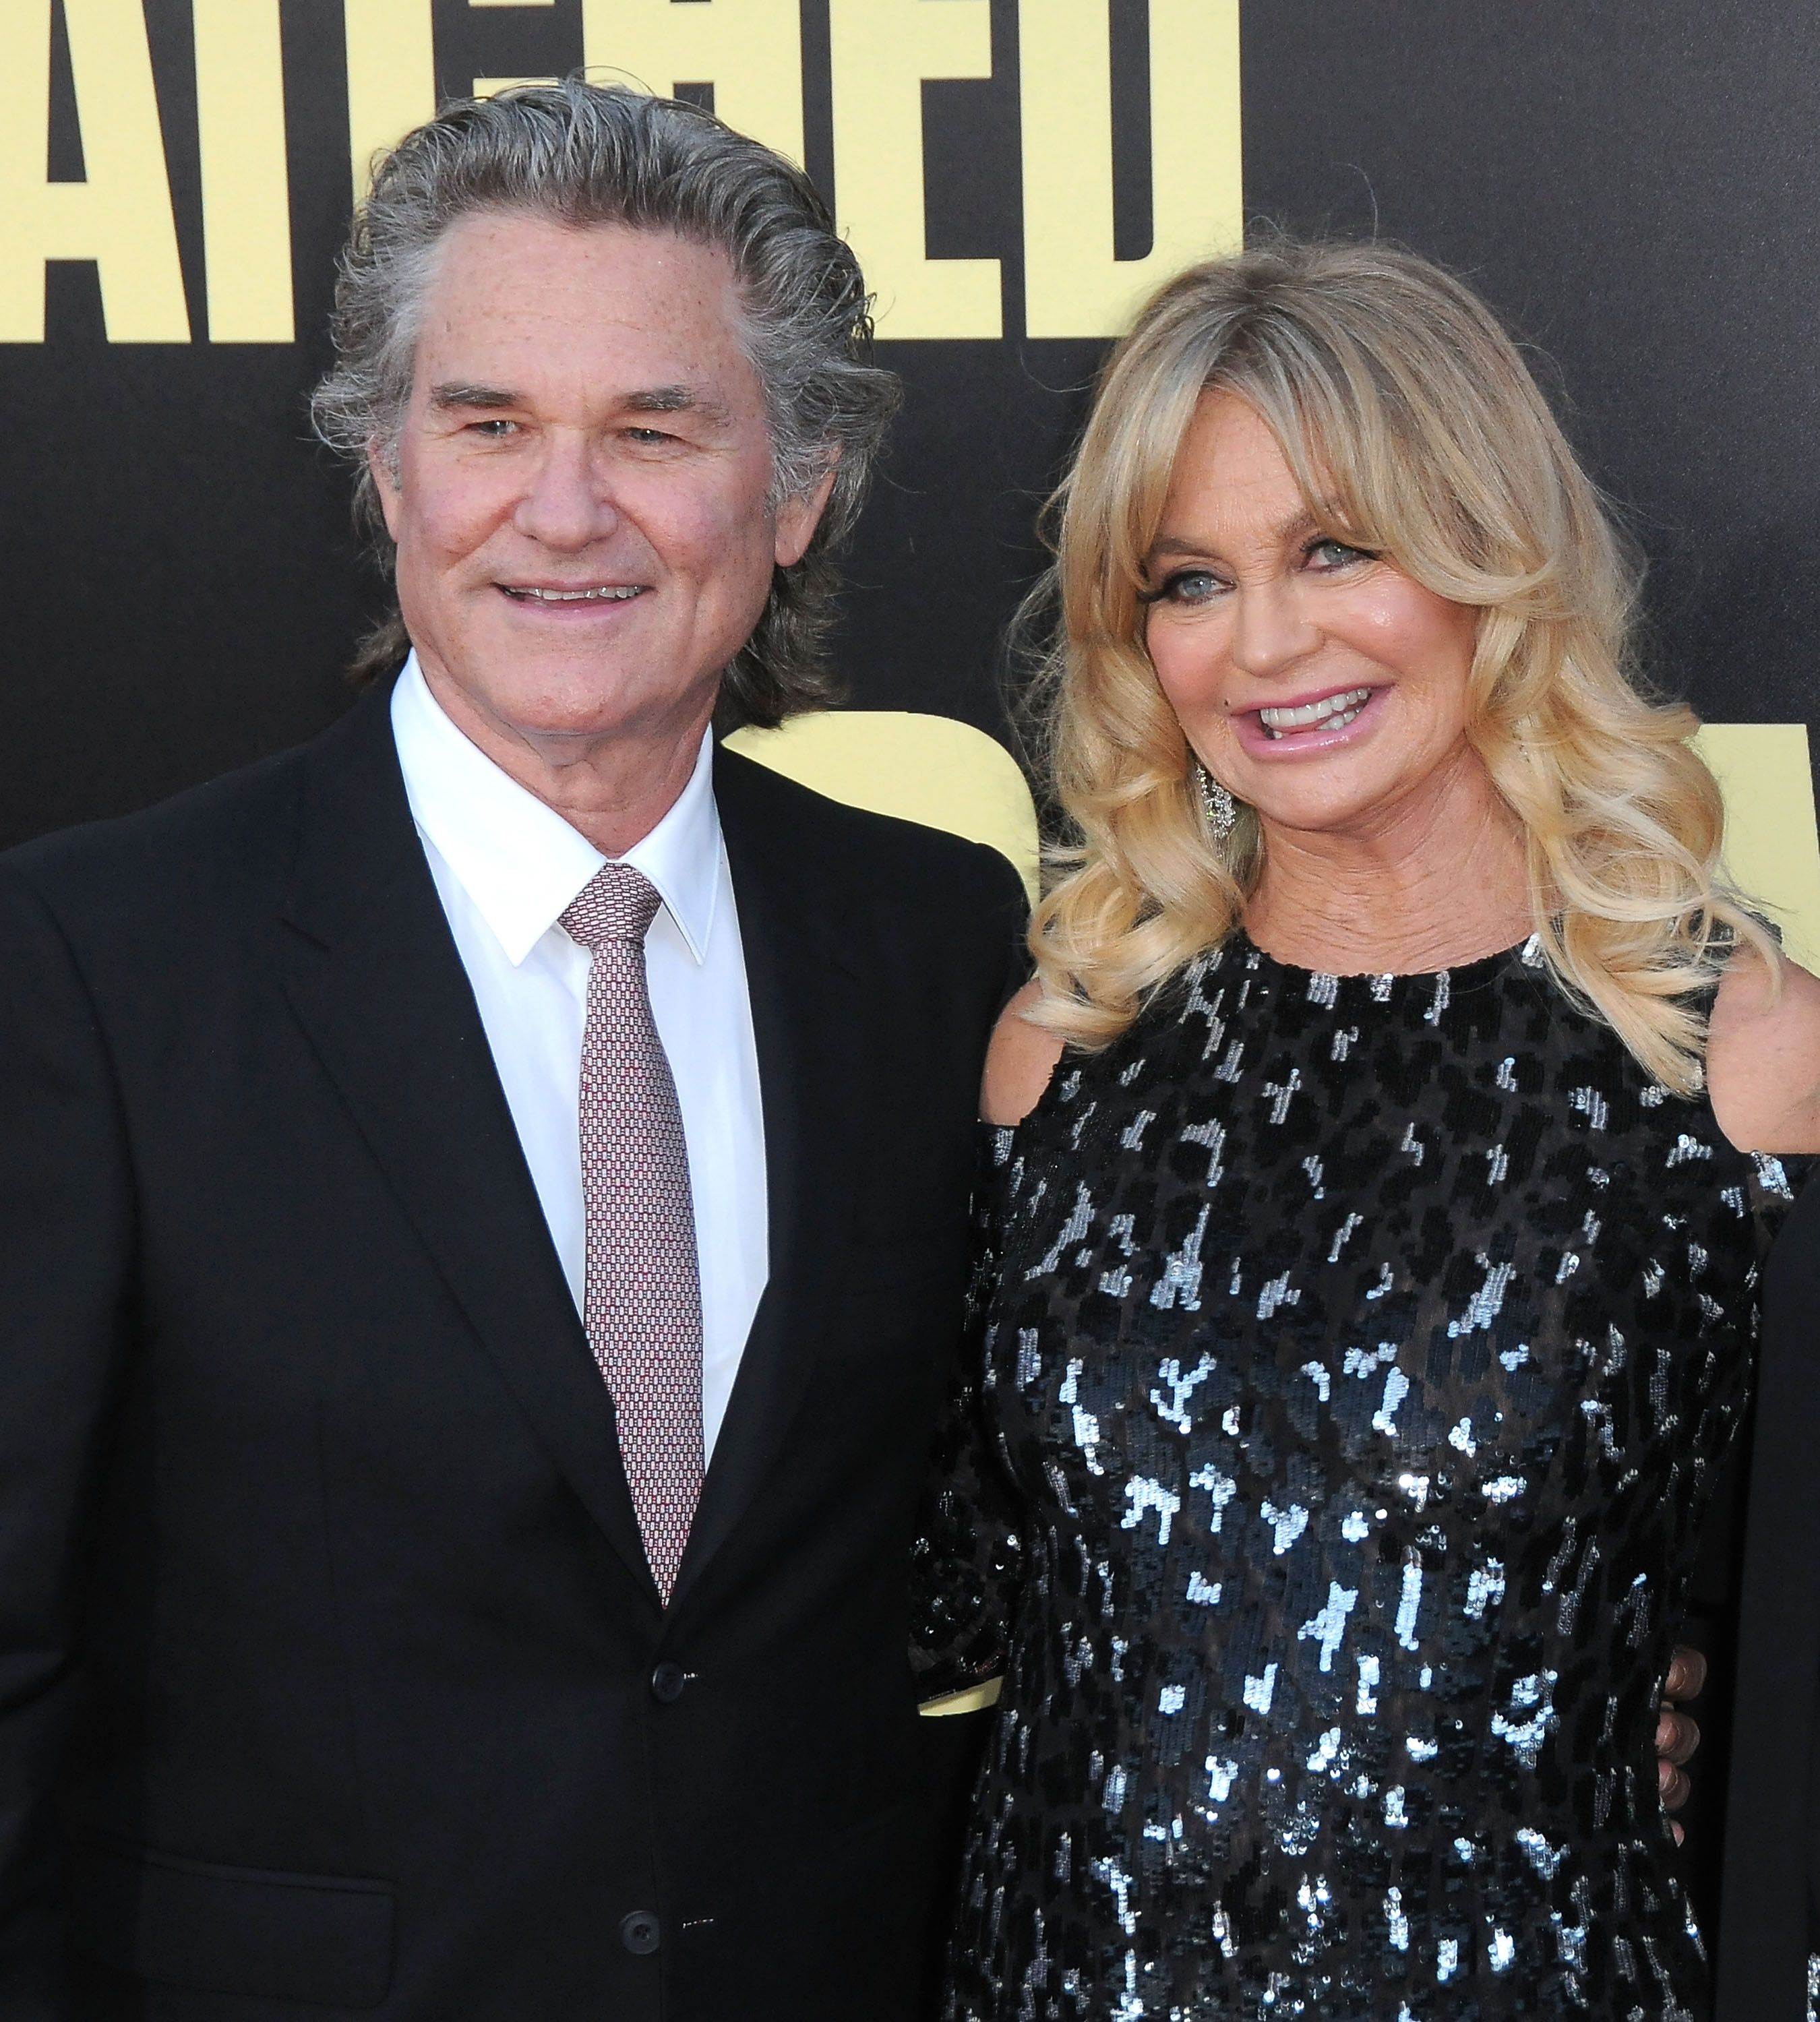 Kurt Russell and Goldie Hawn at the premiere of 'Snatched' in 2017 in Westwood, California | Source: Getty Images